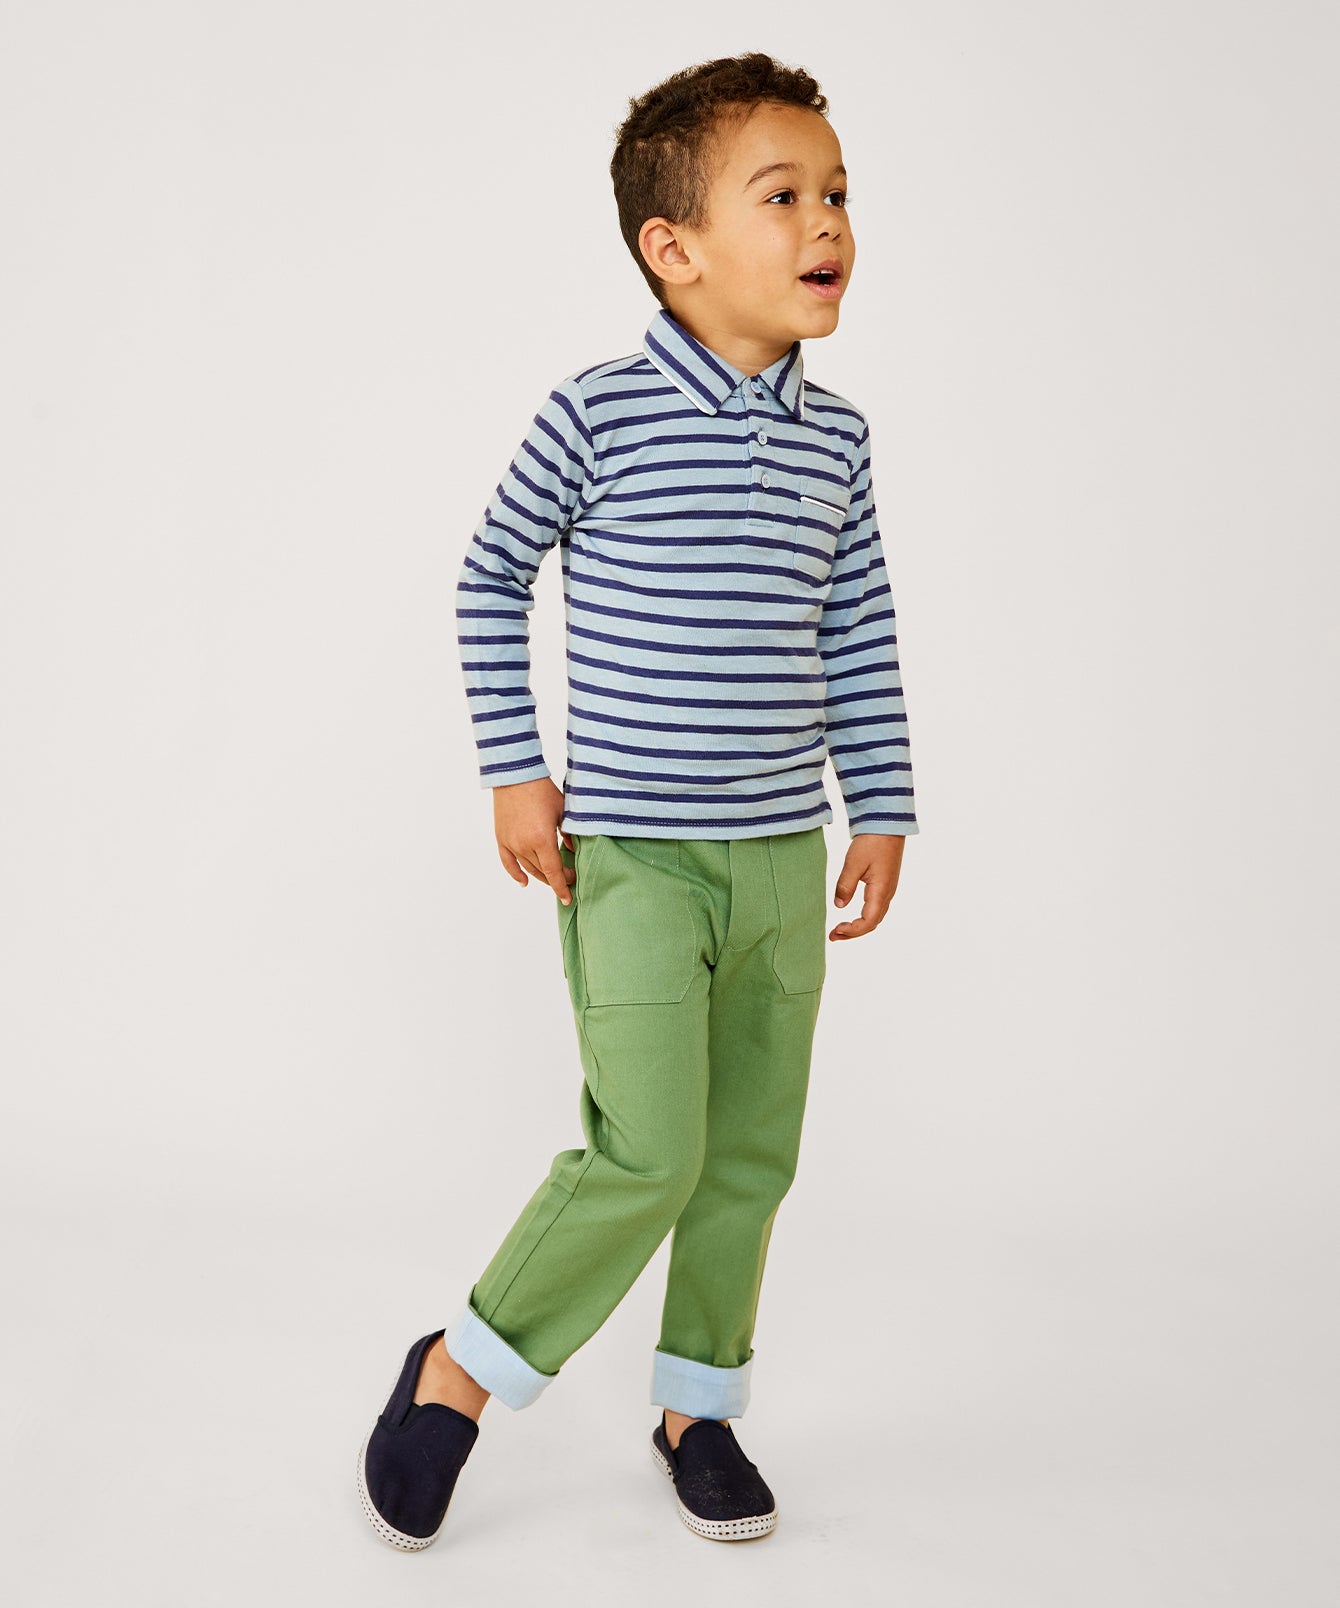 Boys' trousers and shorts | Kids' trousers and shorts | AMERICA TODAY